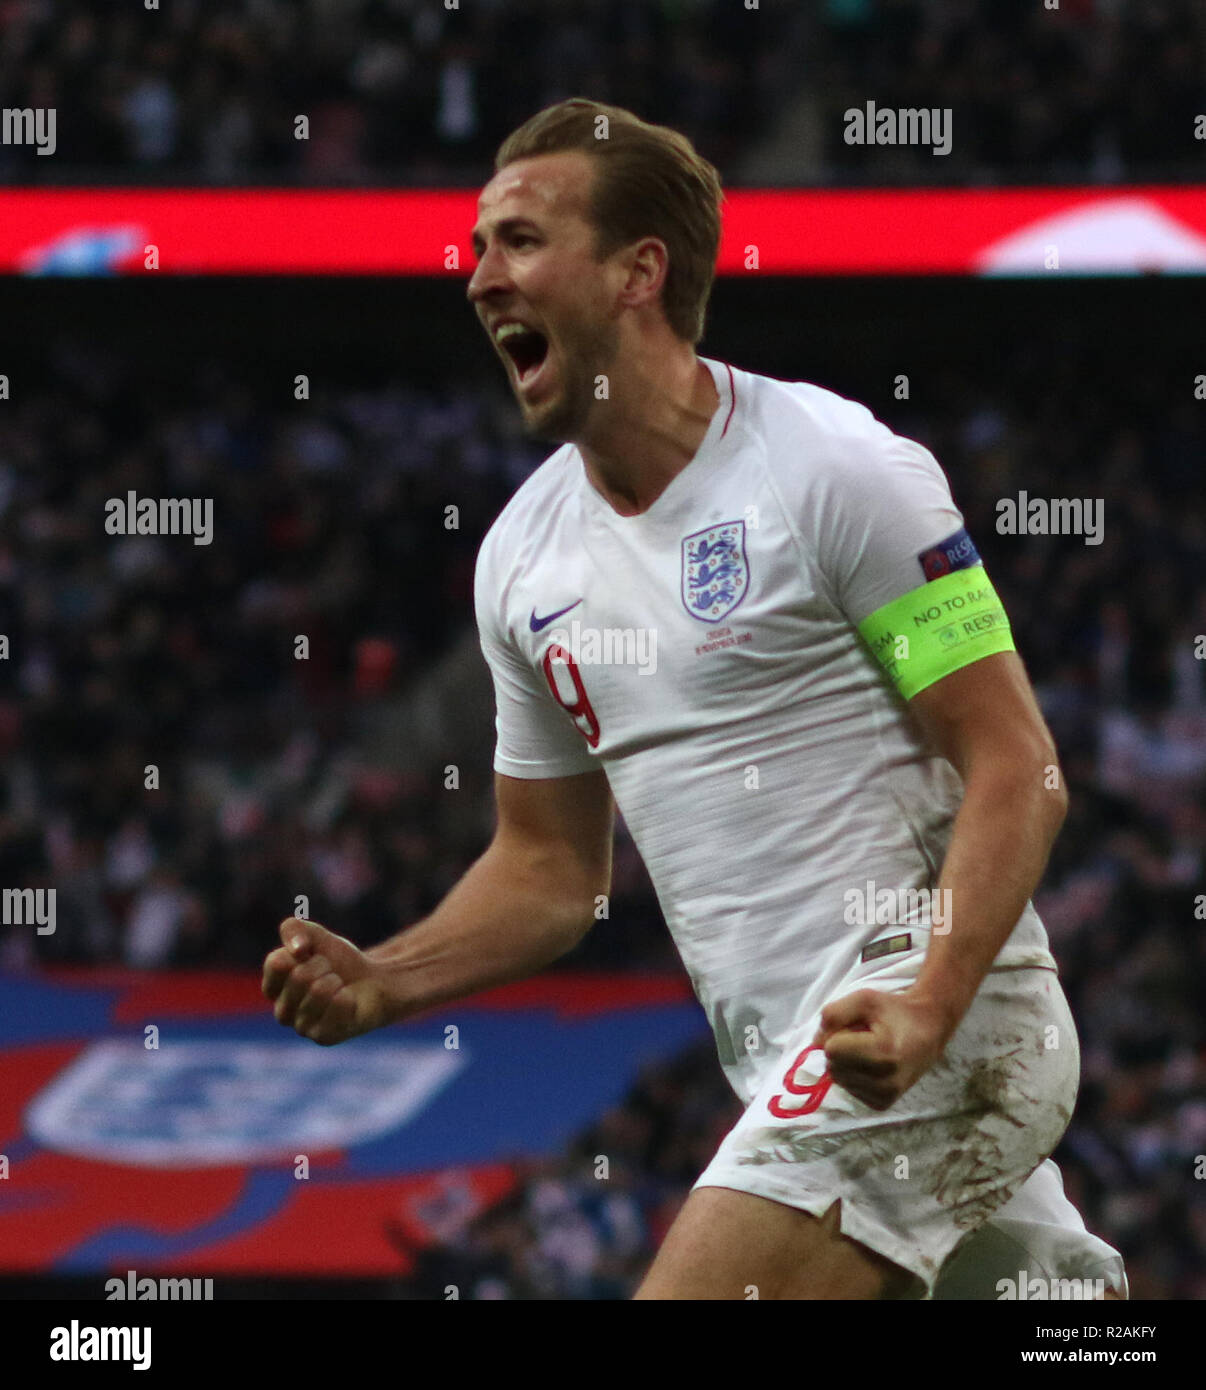 London, UK. 18th Nov 2018.London, UK. 18th Nov 2018.London, UK. 18th Nov 2018. Harry Kane (E) and Jesse Lingard (E) celebrate the second England goal, scored by Kane 2-1 at the England v Croatia UEFA Nations League game at Wembley Stadium, London, November 18, 2018. **This picture is for editorial use ONLY** Credit: Paul Marriott/Alamy Live News Credit: Paul Marriott/Alamy Live News Credit: Paul Marriott/Alamy Live News Stock Photo